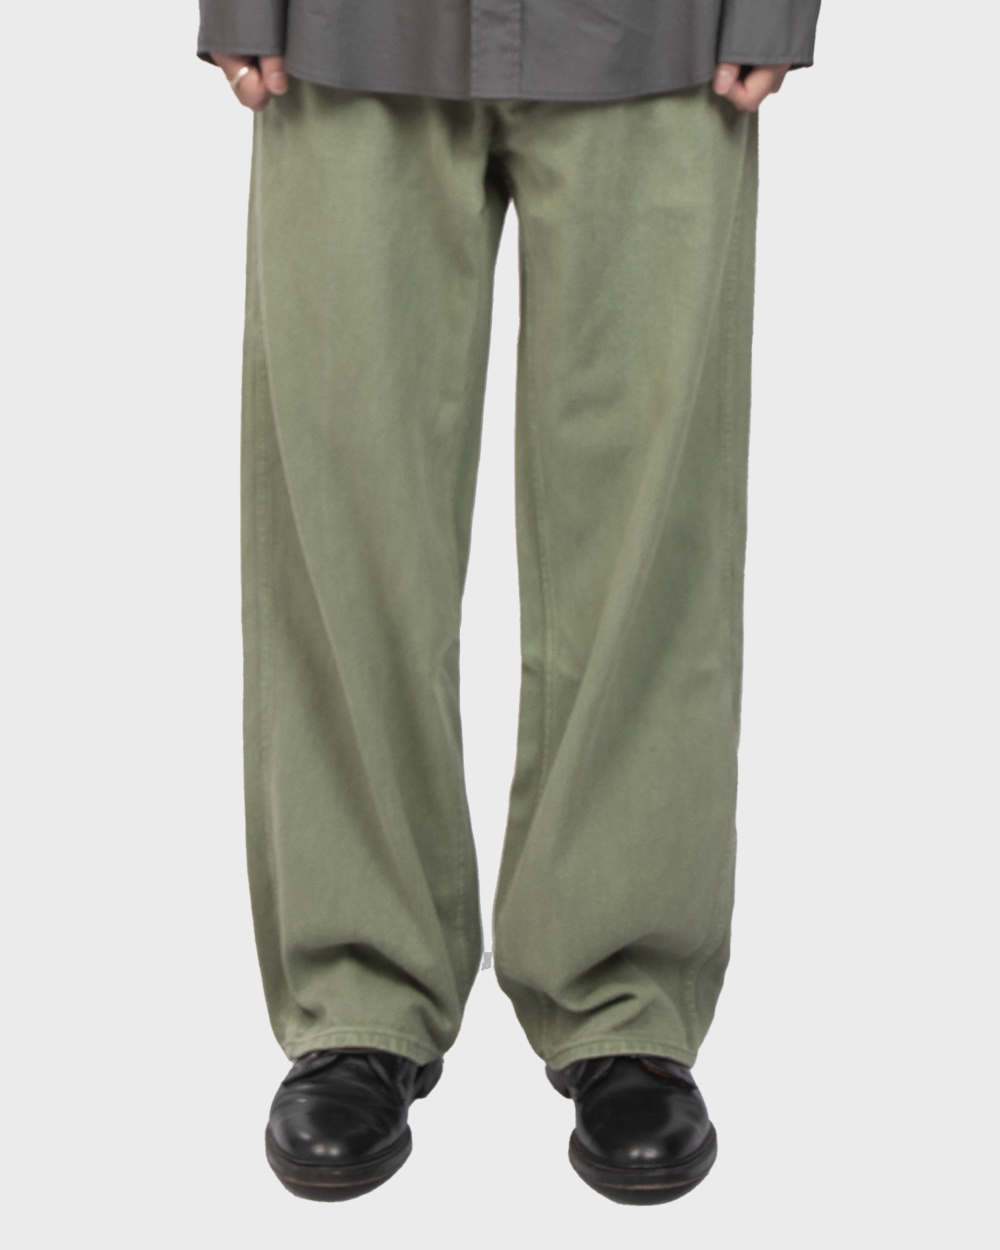 Wide Dying Denim Pants (Grass)